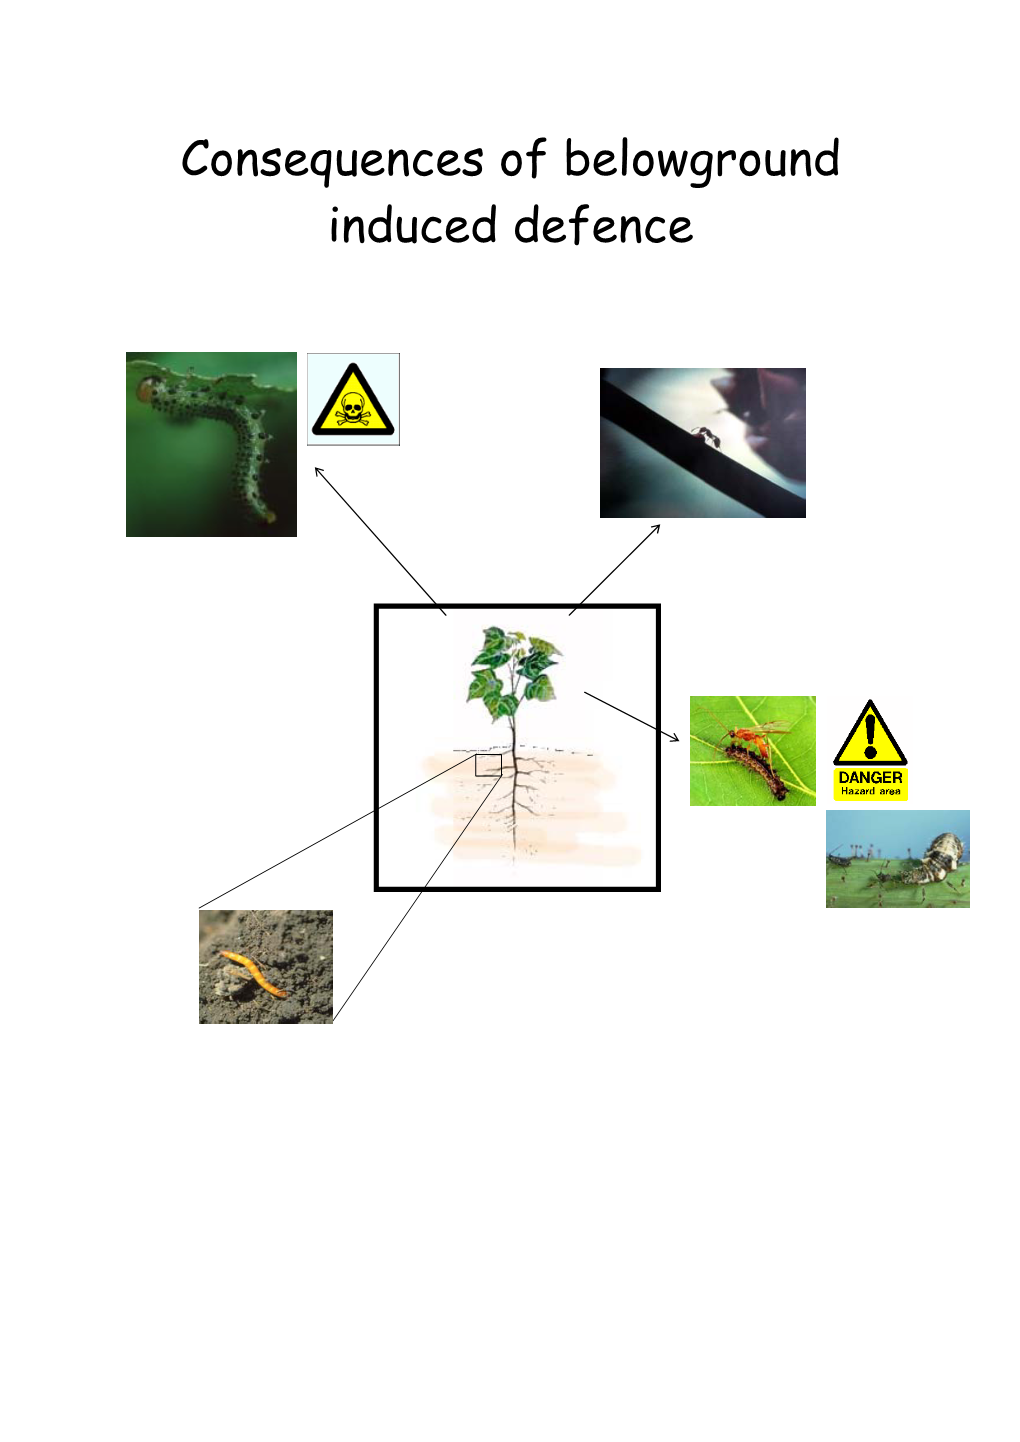 Consequences of Belowground Induced Defence